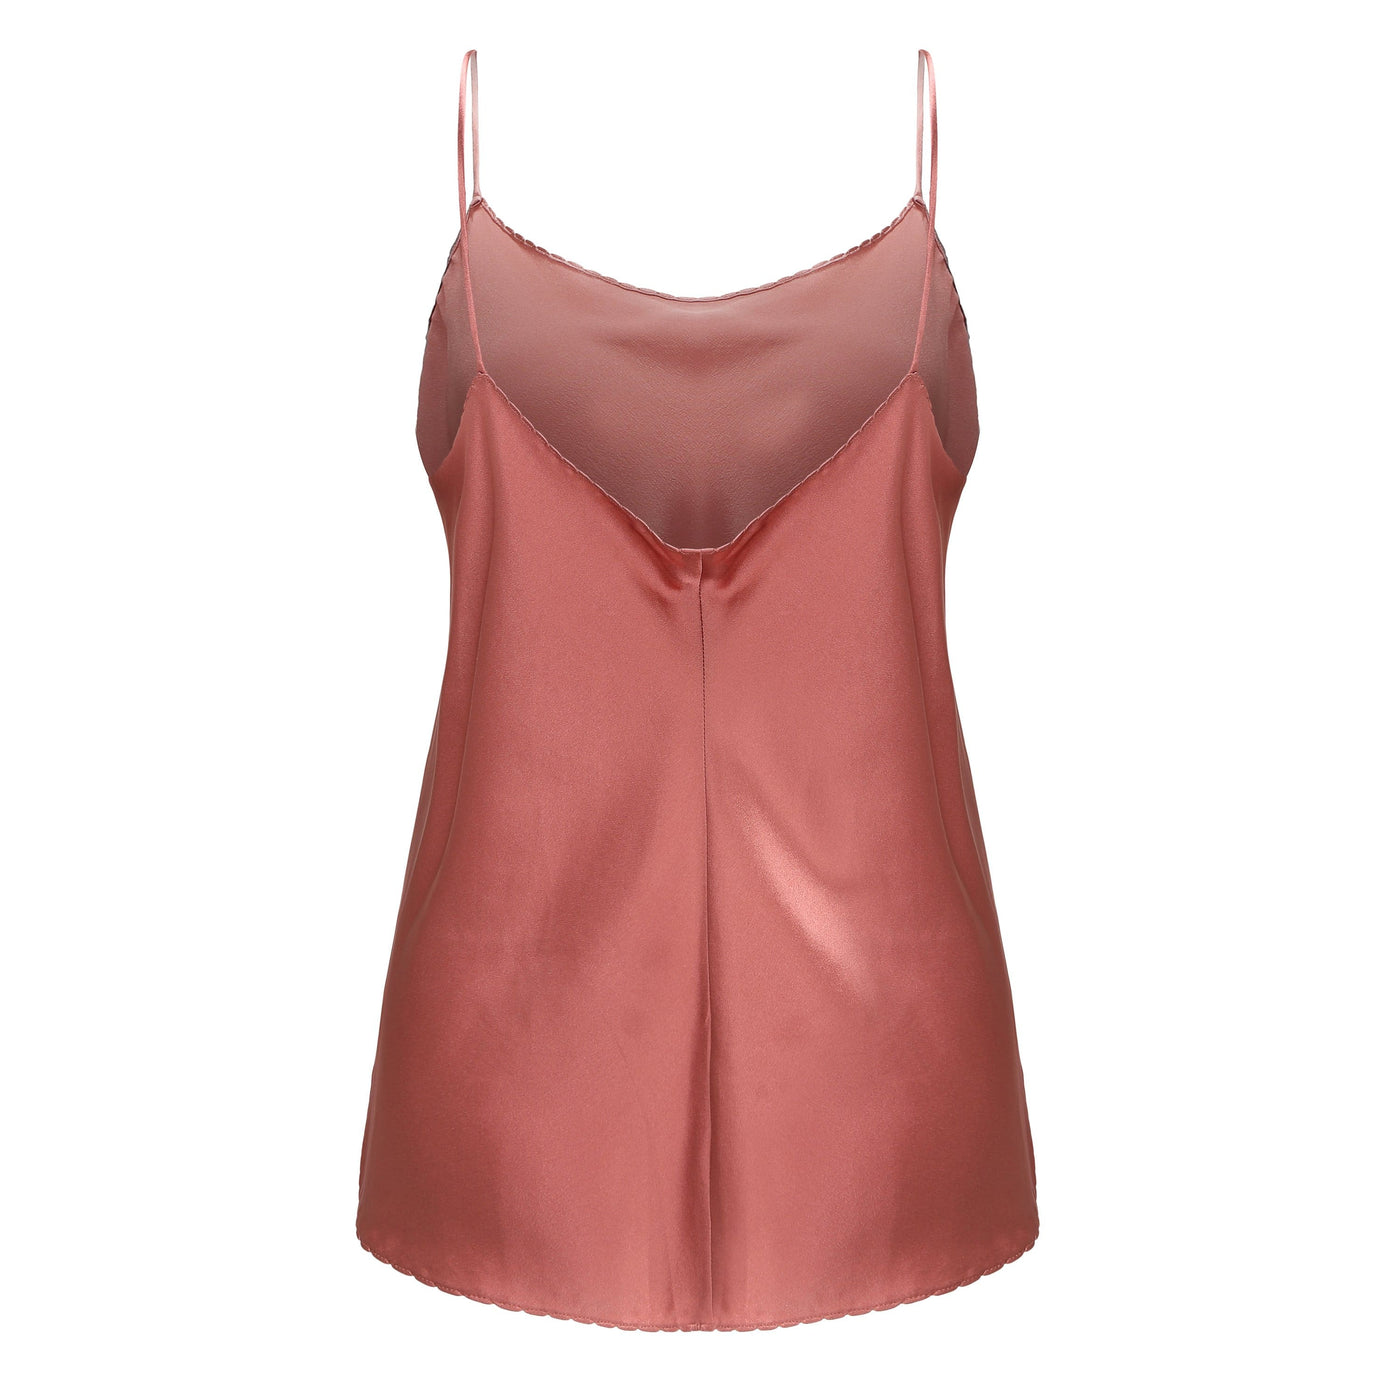 illy Pilly Collection bluesign® certified silk Eva Cami in Dusty Pink as 3D image showing back view